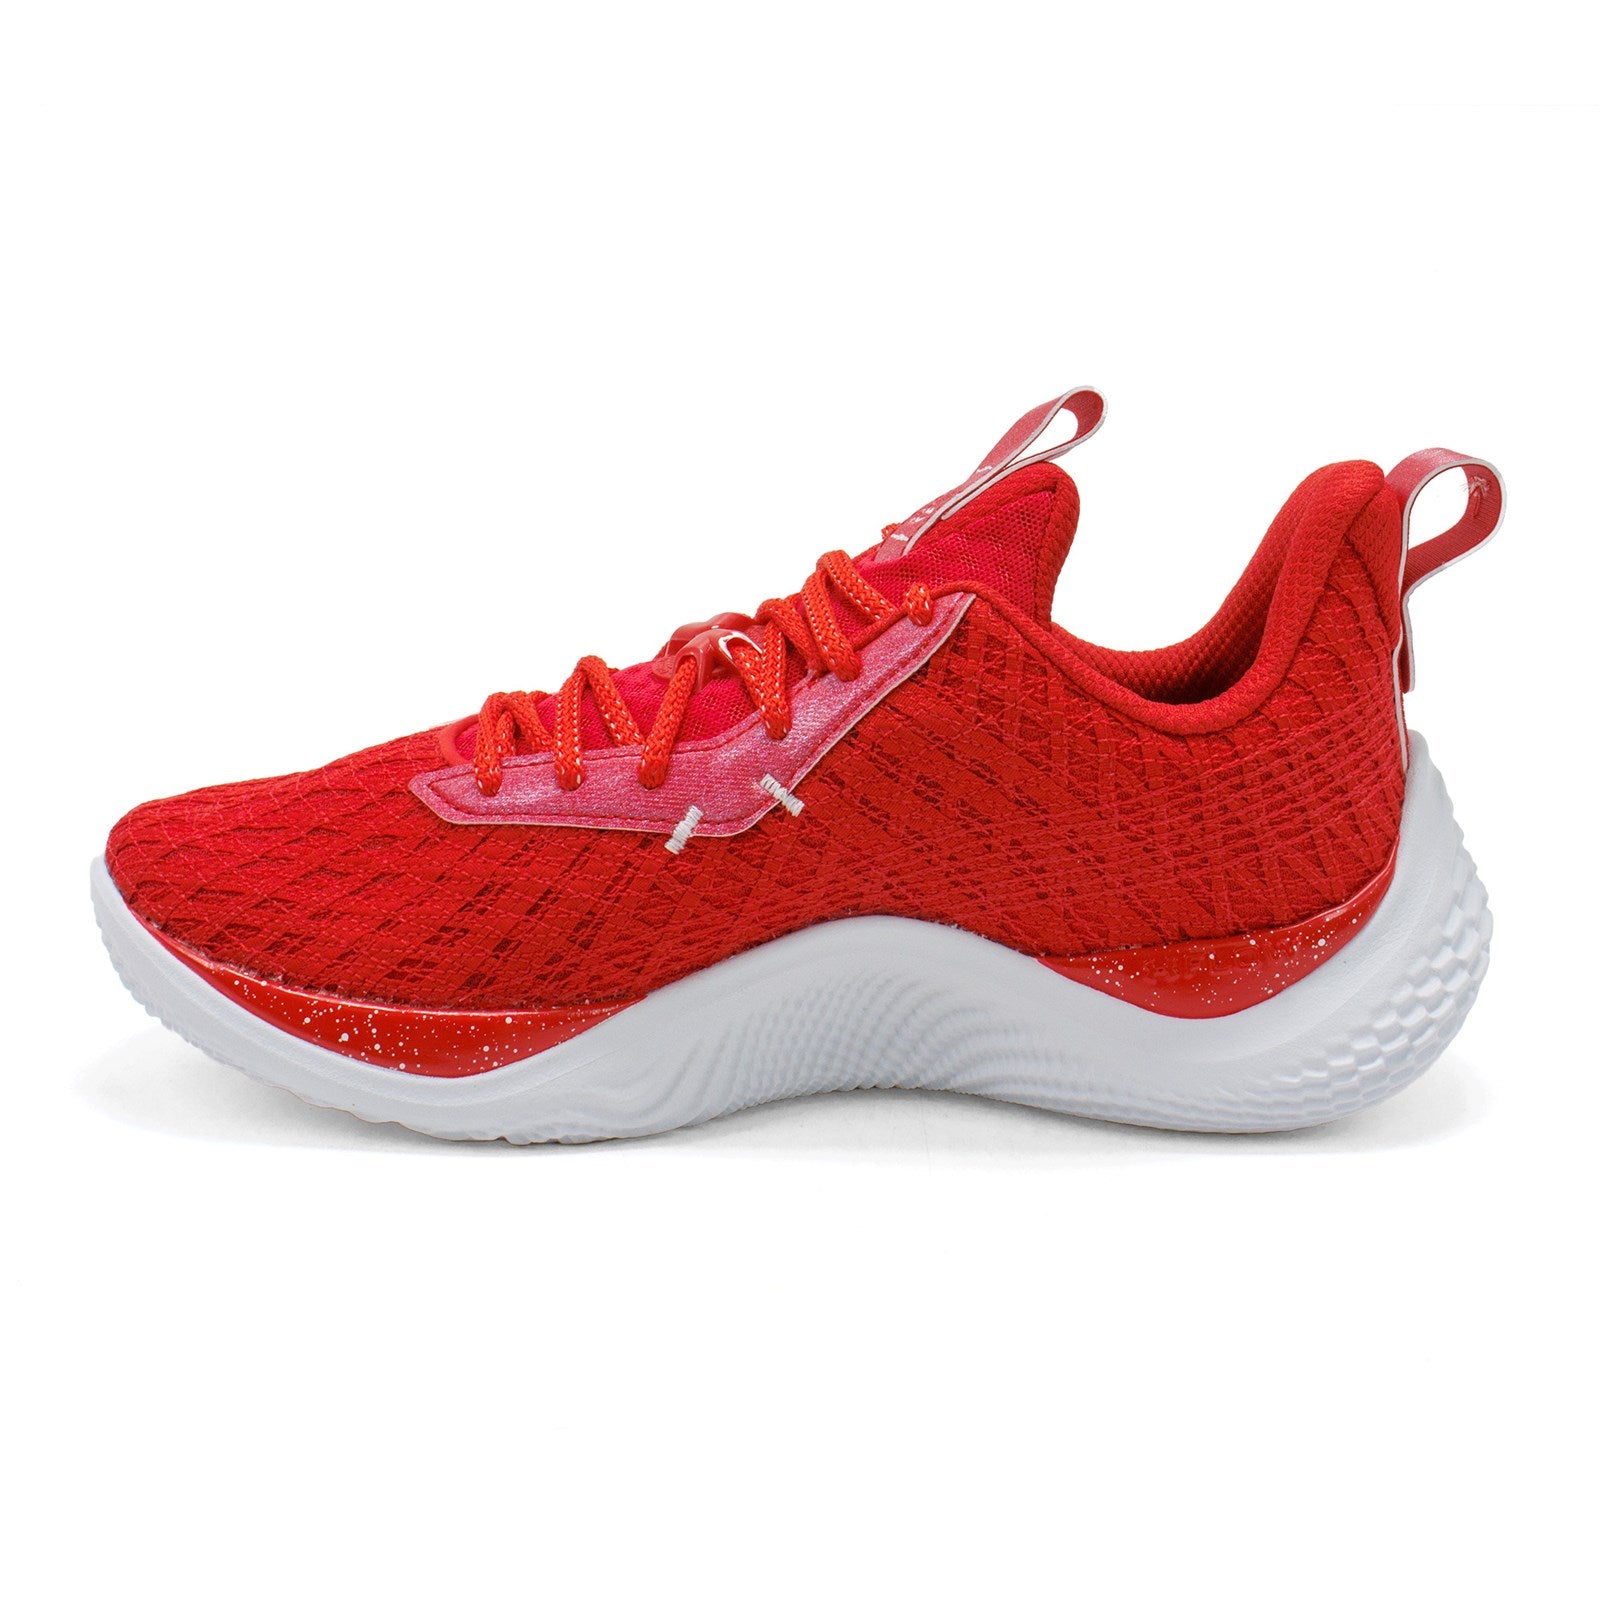 Under Armour Men Team Curry 10 Basketball Shoes